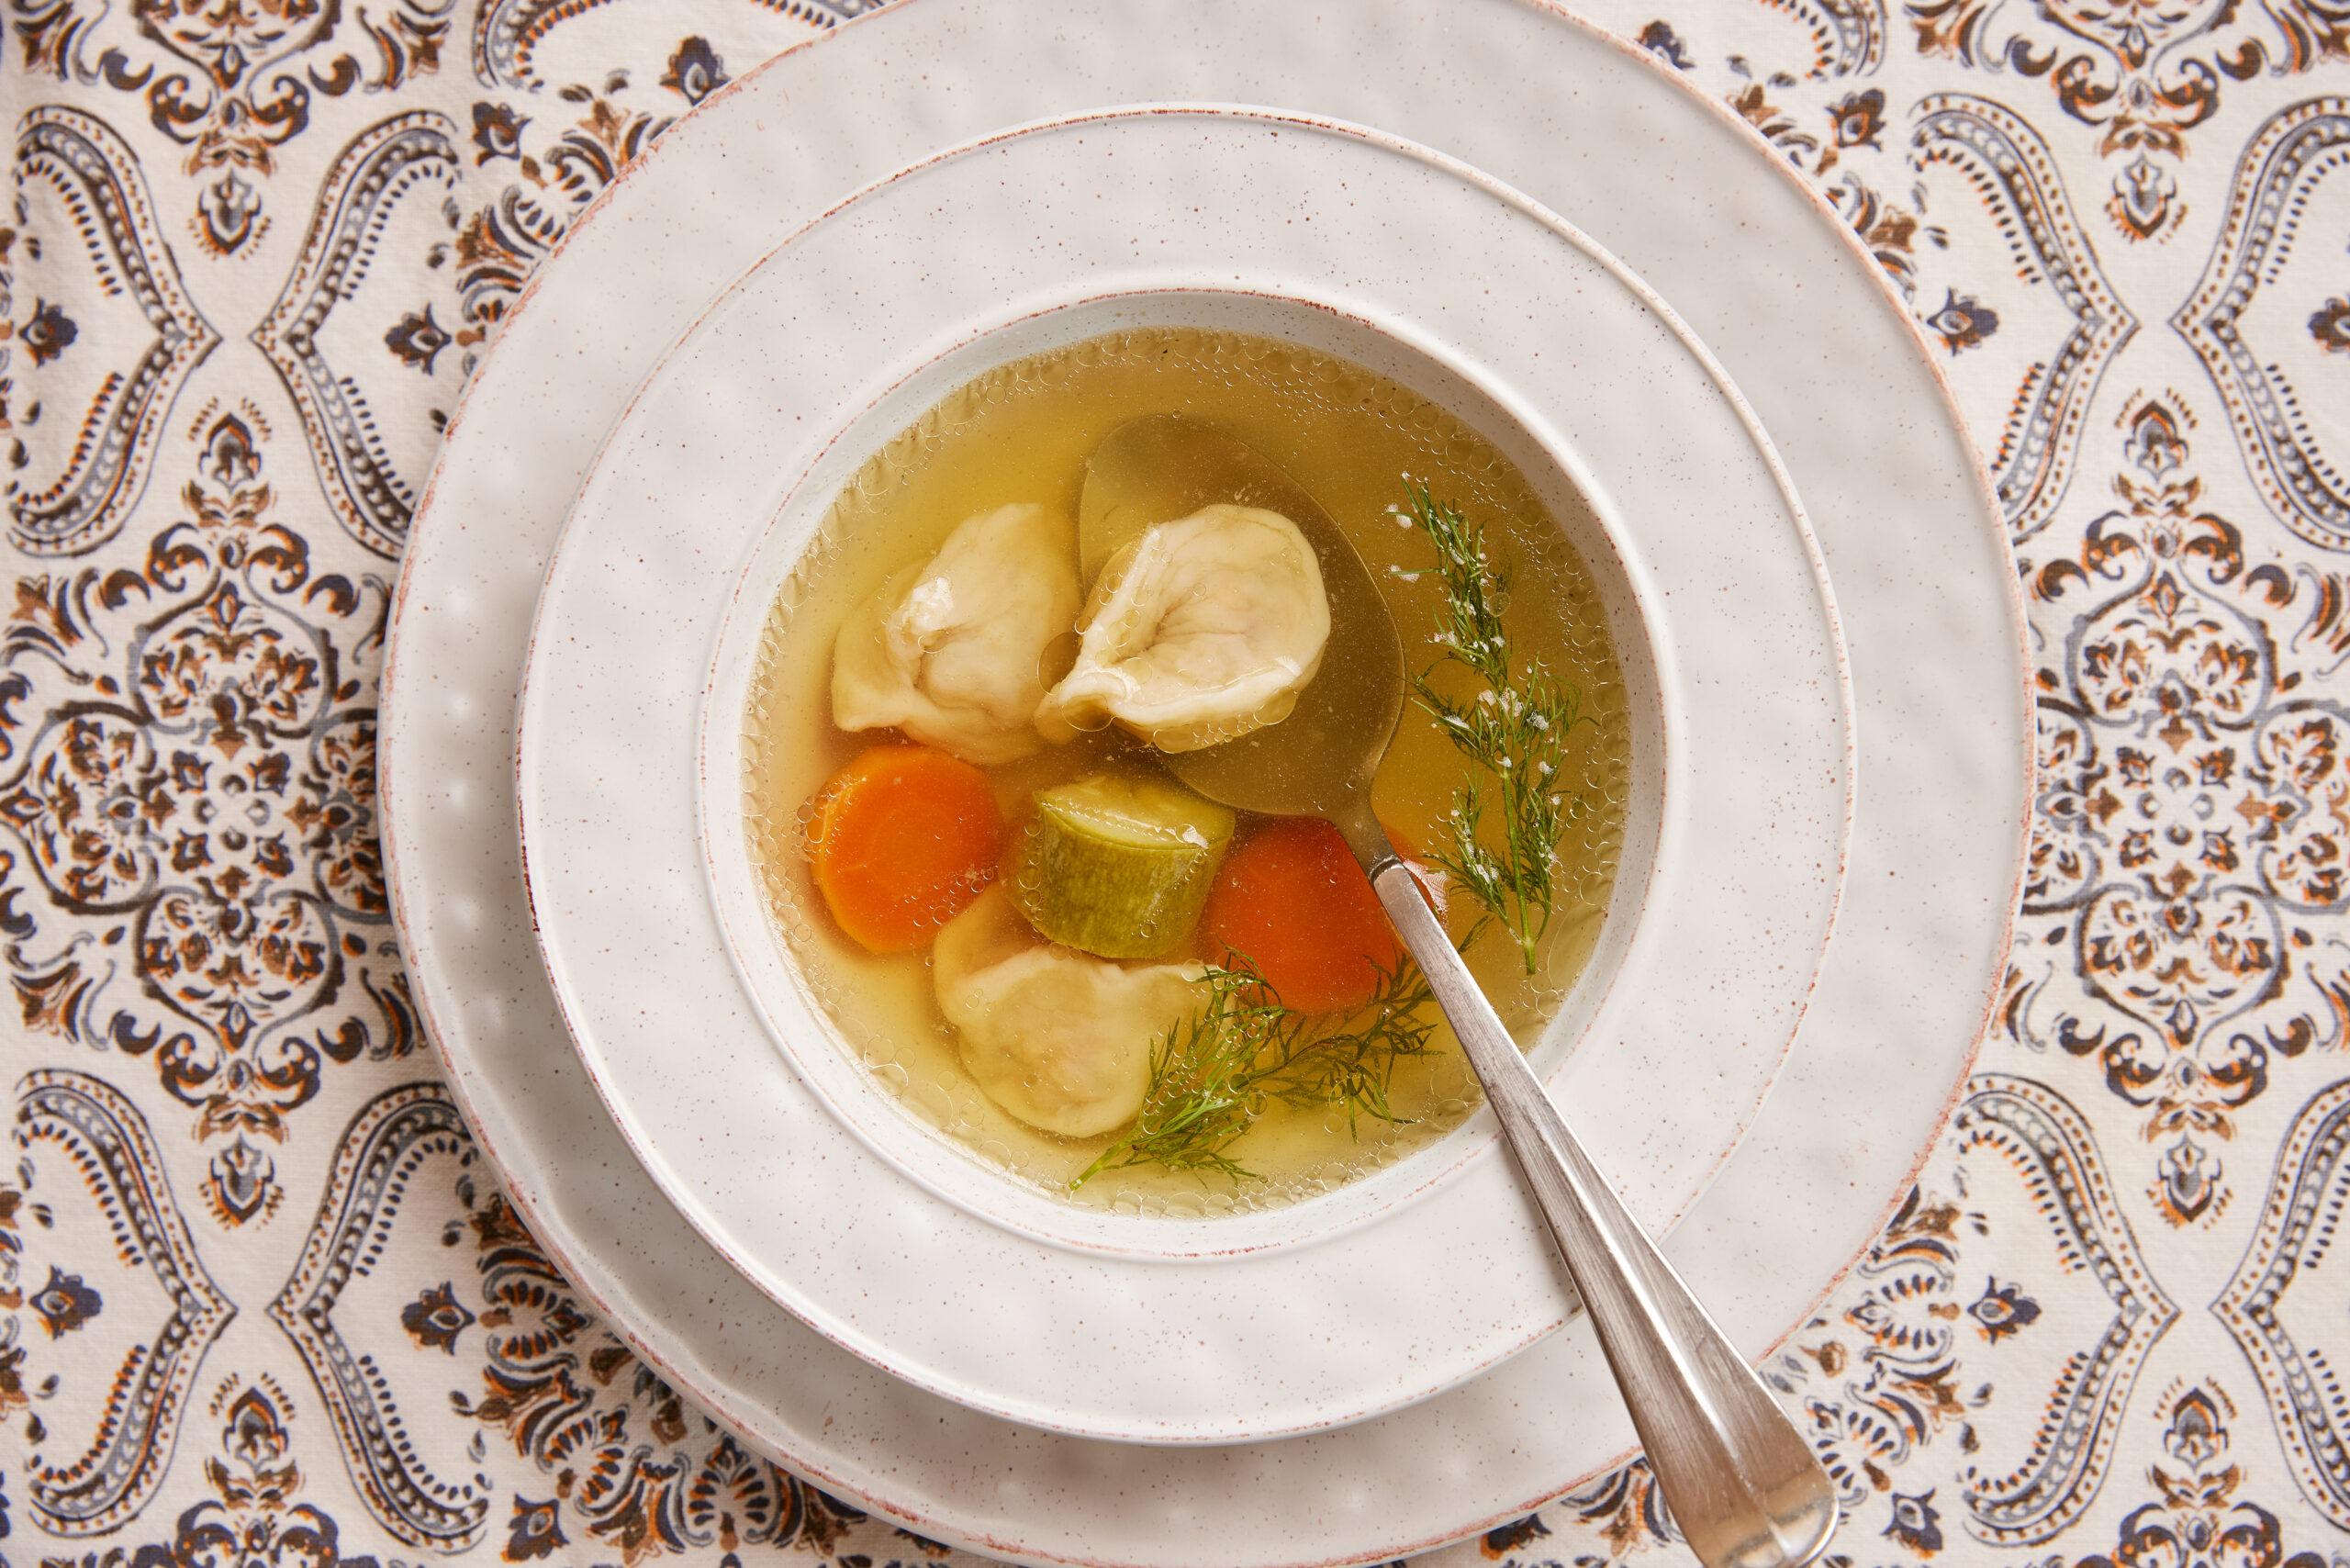 Kreplach (Jewish dumplings) soup with clear broth, carrots and zucchini